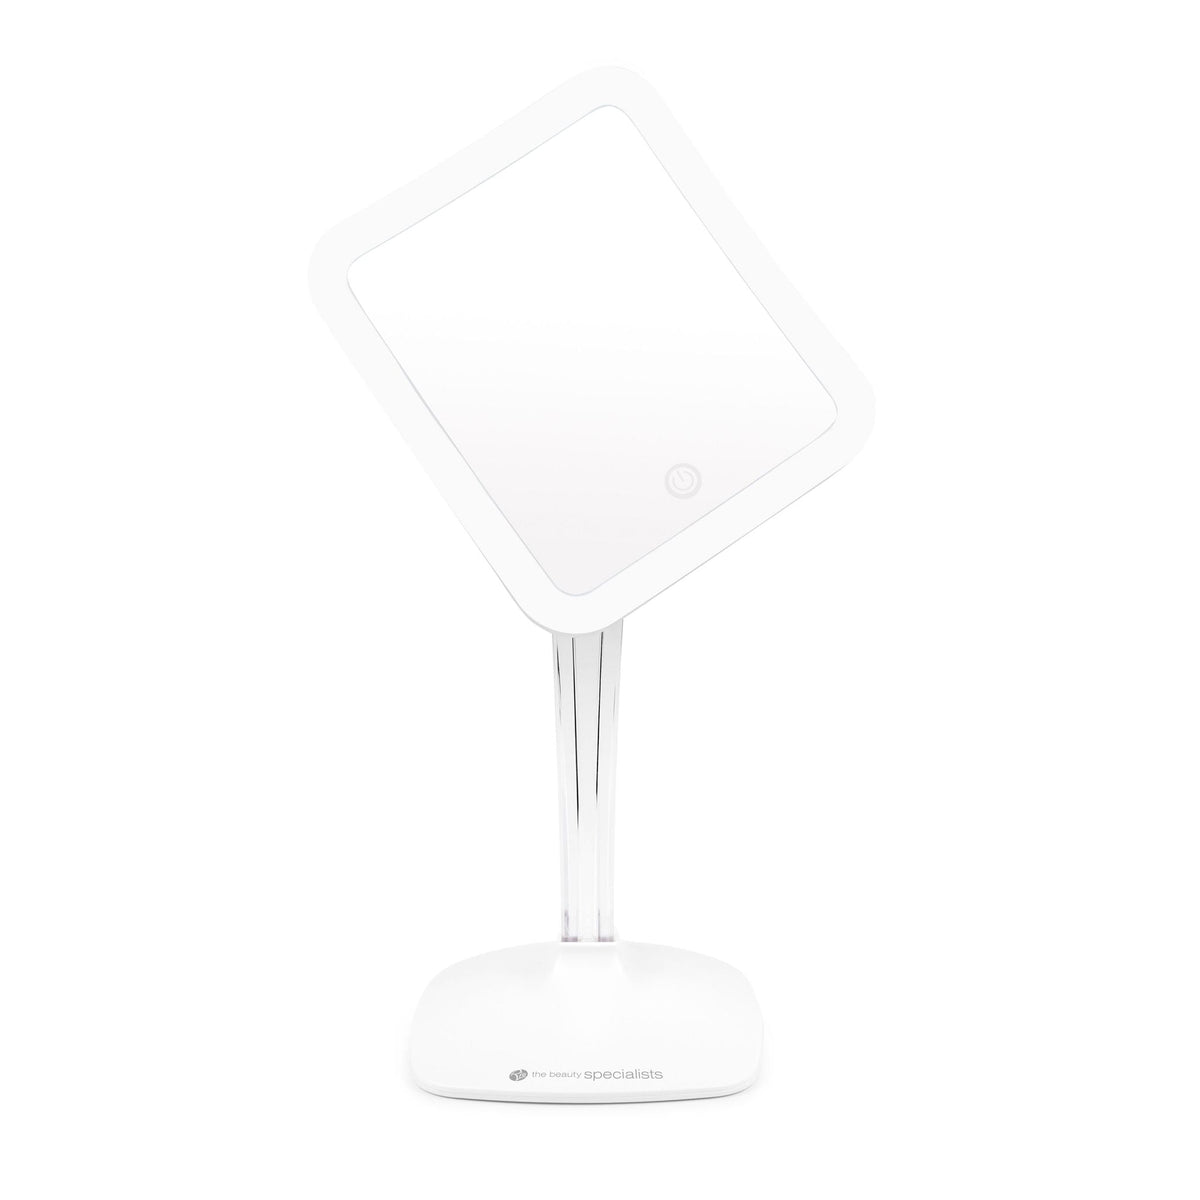 Elegance 7x magnification make up mirror rotated at 45 degree angle